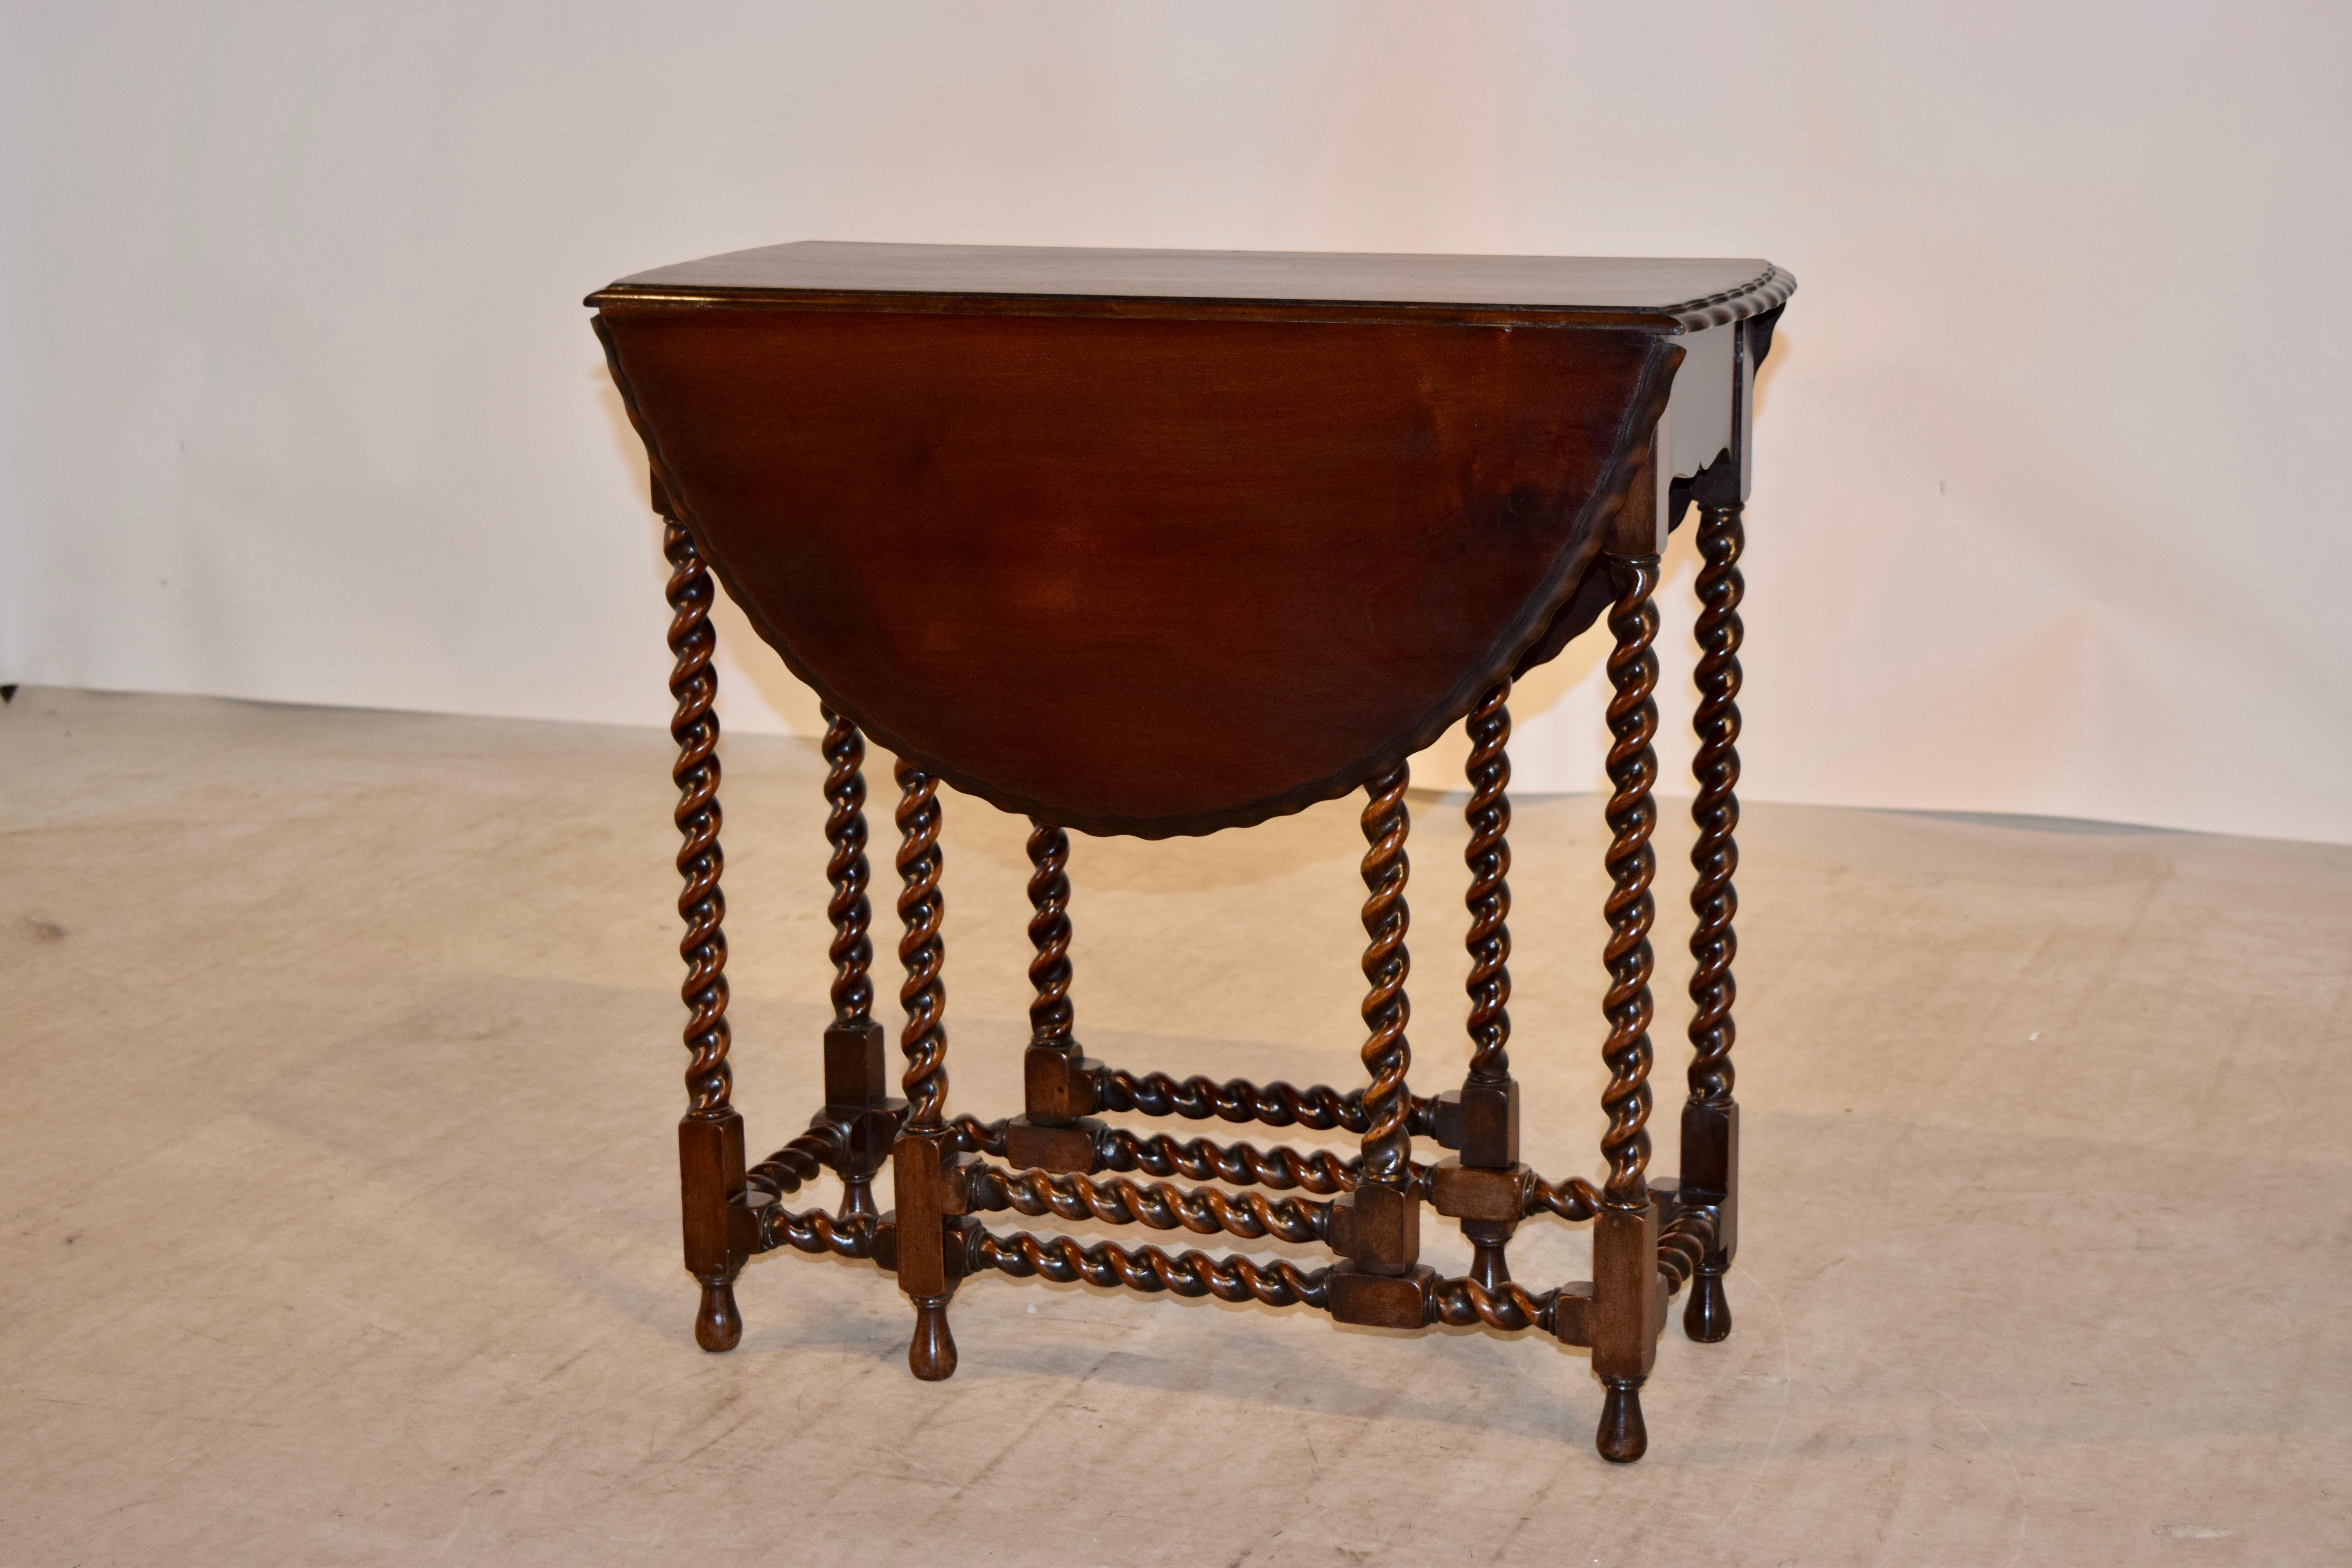 Late 19th century English gate leg table with a double scalloped and beveled edge, following down to a scalloped apron and supported on hand-turned barley twist legs, gates, and stretchers and resting on hand-turned feet. The top open measures 31.75